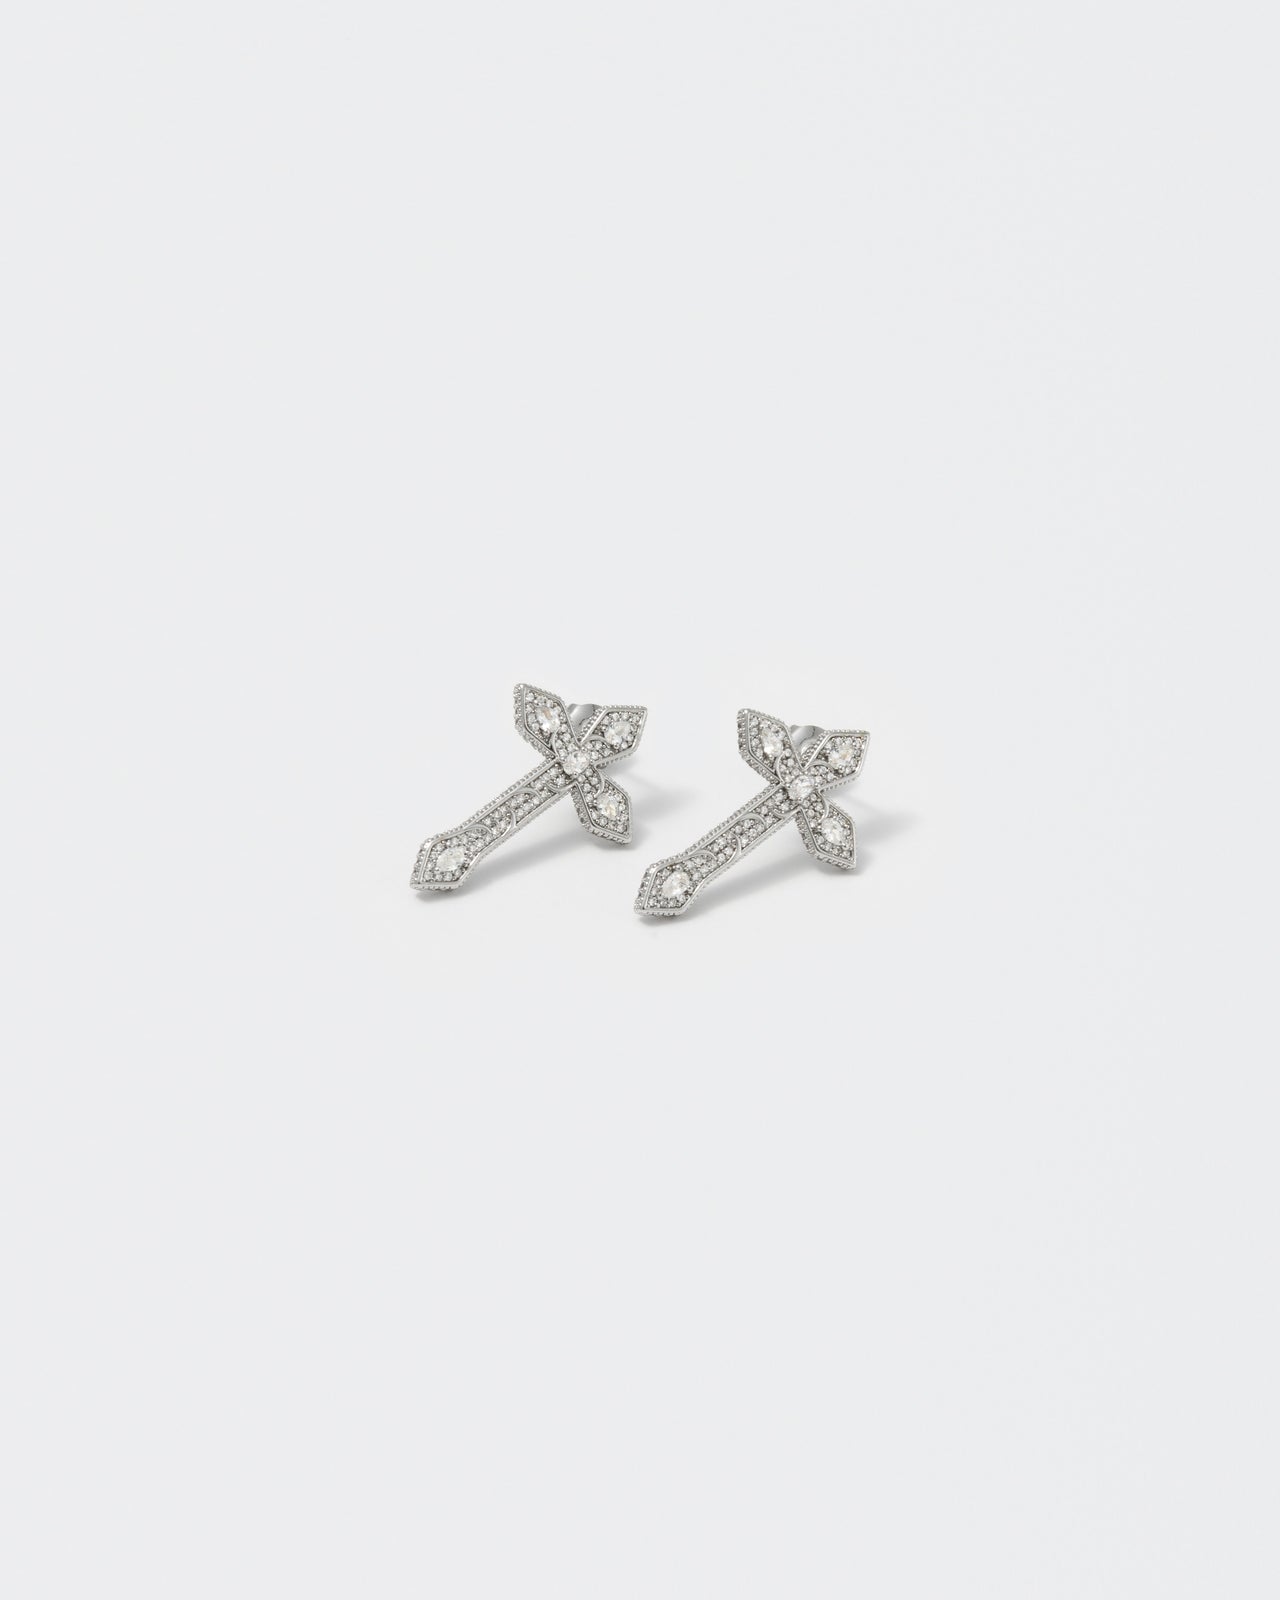 gothic cross earrings with 18kt white gold coating, drop and oval shaped diamond white stones with metal gothic detailing. Hand-set micropavé on front and sides. Silver 925 pin and butterly closure with logo.